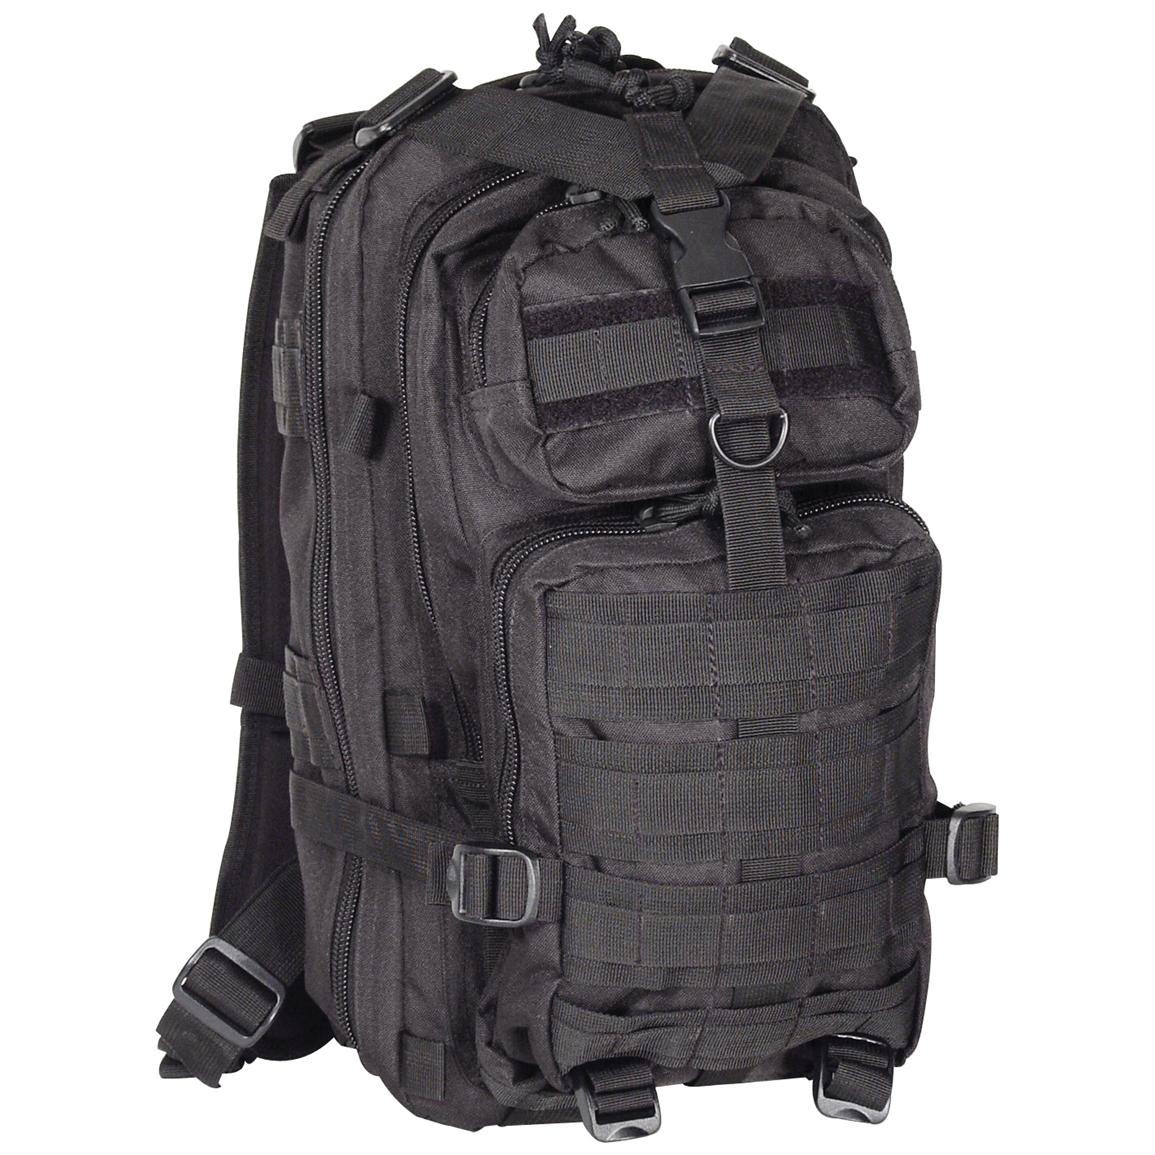 Level III Assault Pack - 131428, Military Style Backpacks & Bags at ...